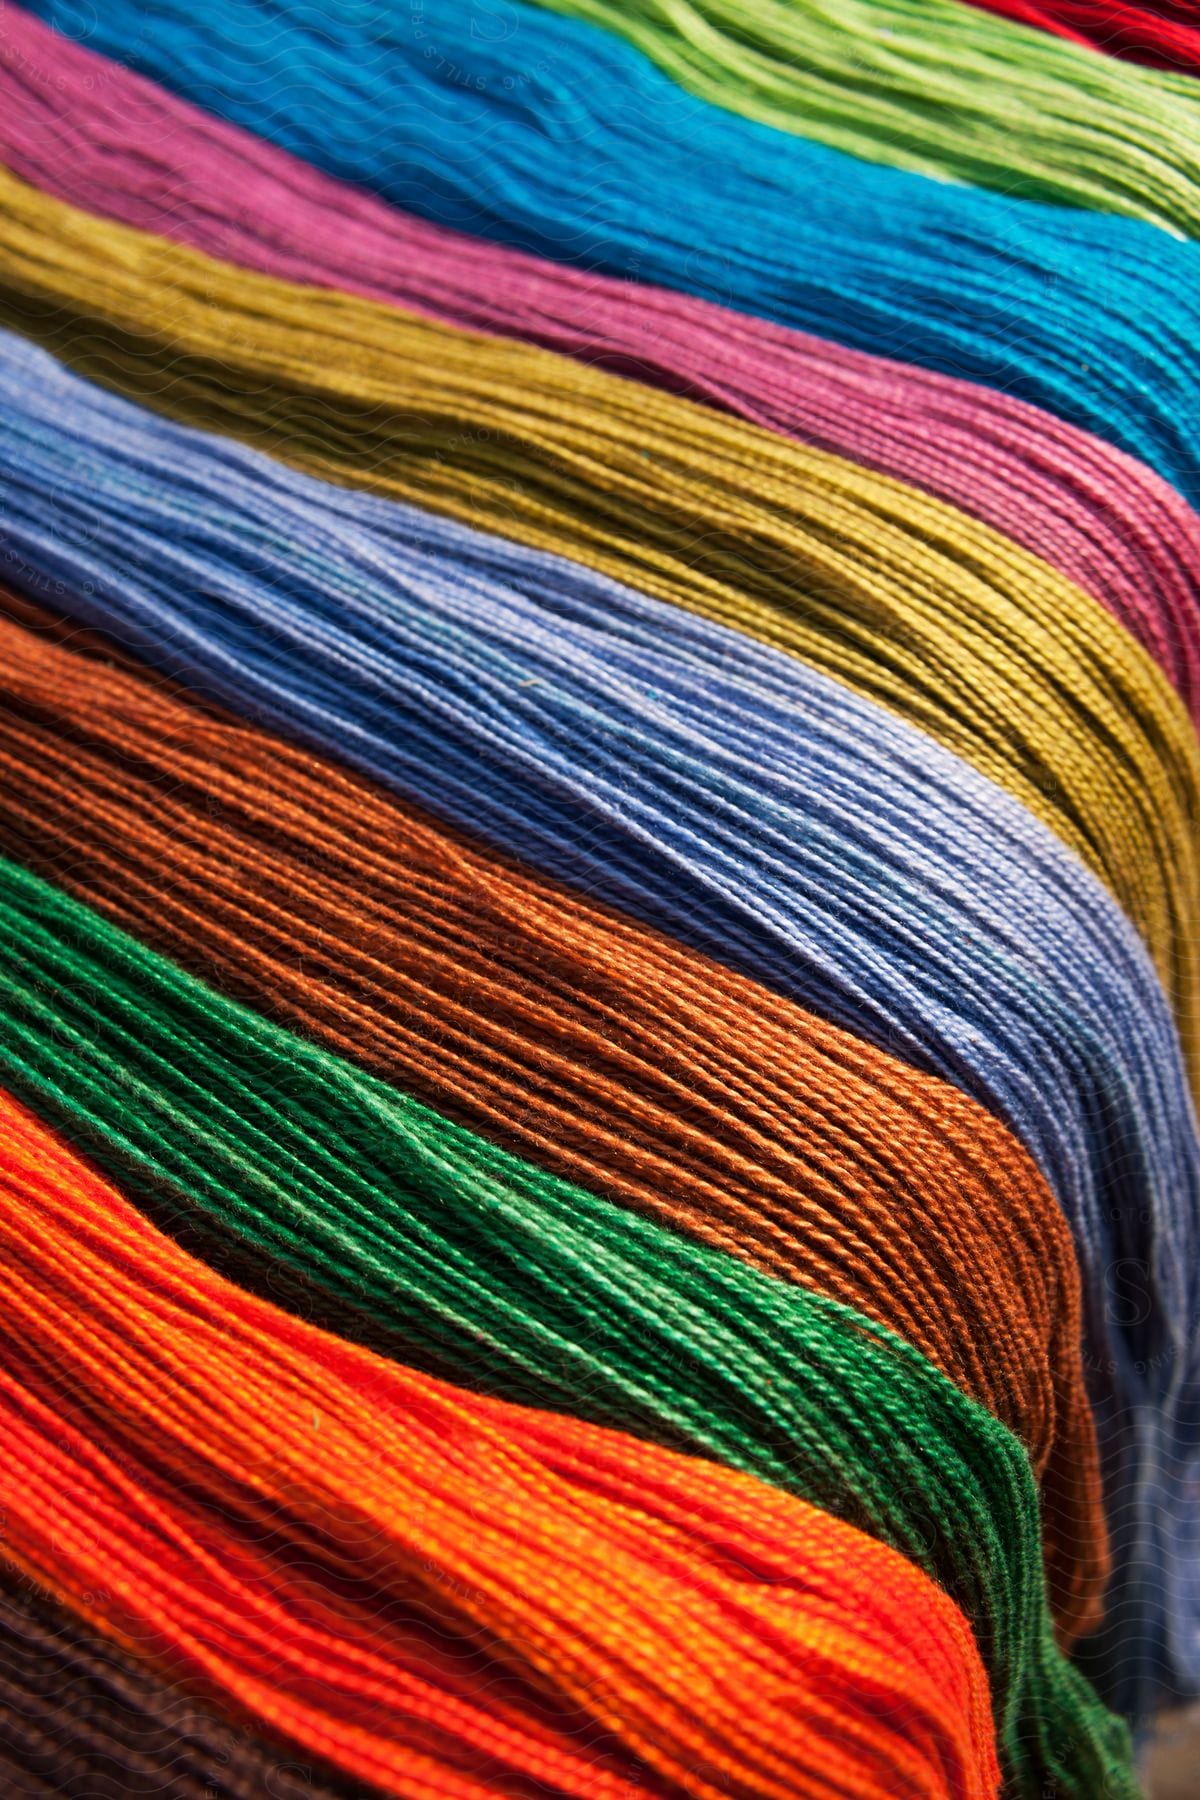 Embroidery thread in various colors draped over objects